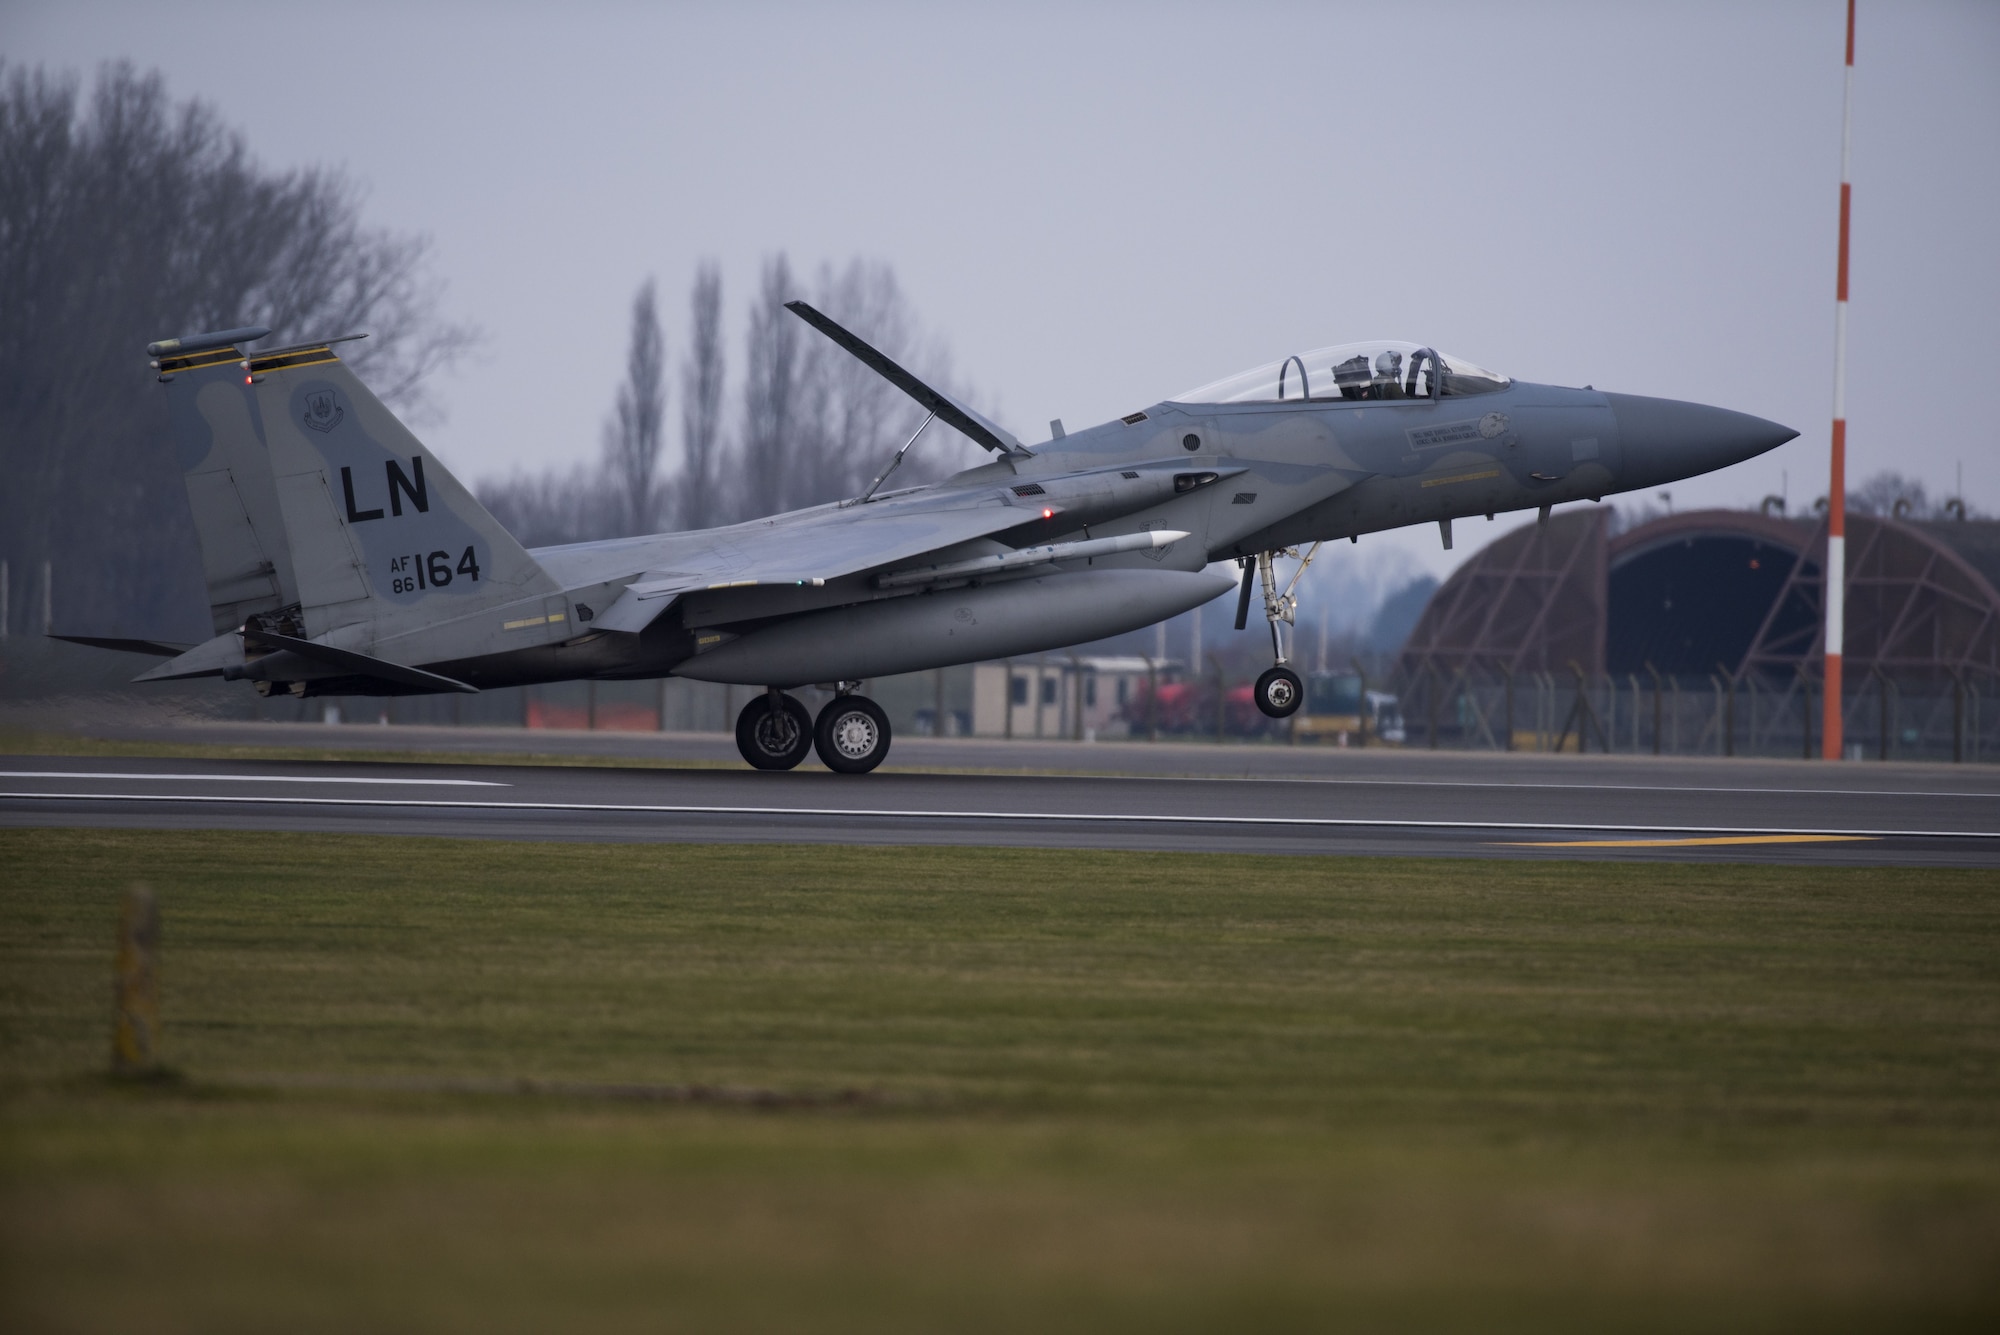 An F-15C from the 493rd Fighter Squadron lands at Royal Air Force Lakenheath, England, Feb. 6, 2018. The F-15C is an all-weather, extremely maneuverable, tactical fighter designed to permit the Air Force to gain and maintain air supremacy over the battlefield. (U.S. Air Force photo/Senior Airman Malcolm Mayfield)